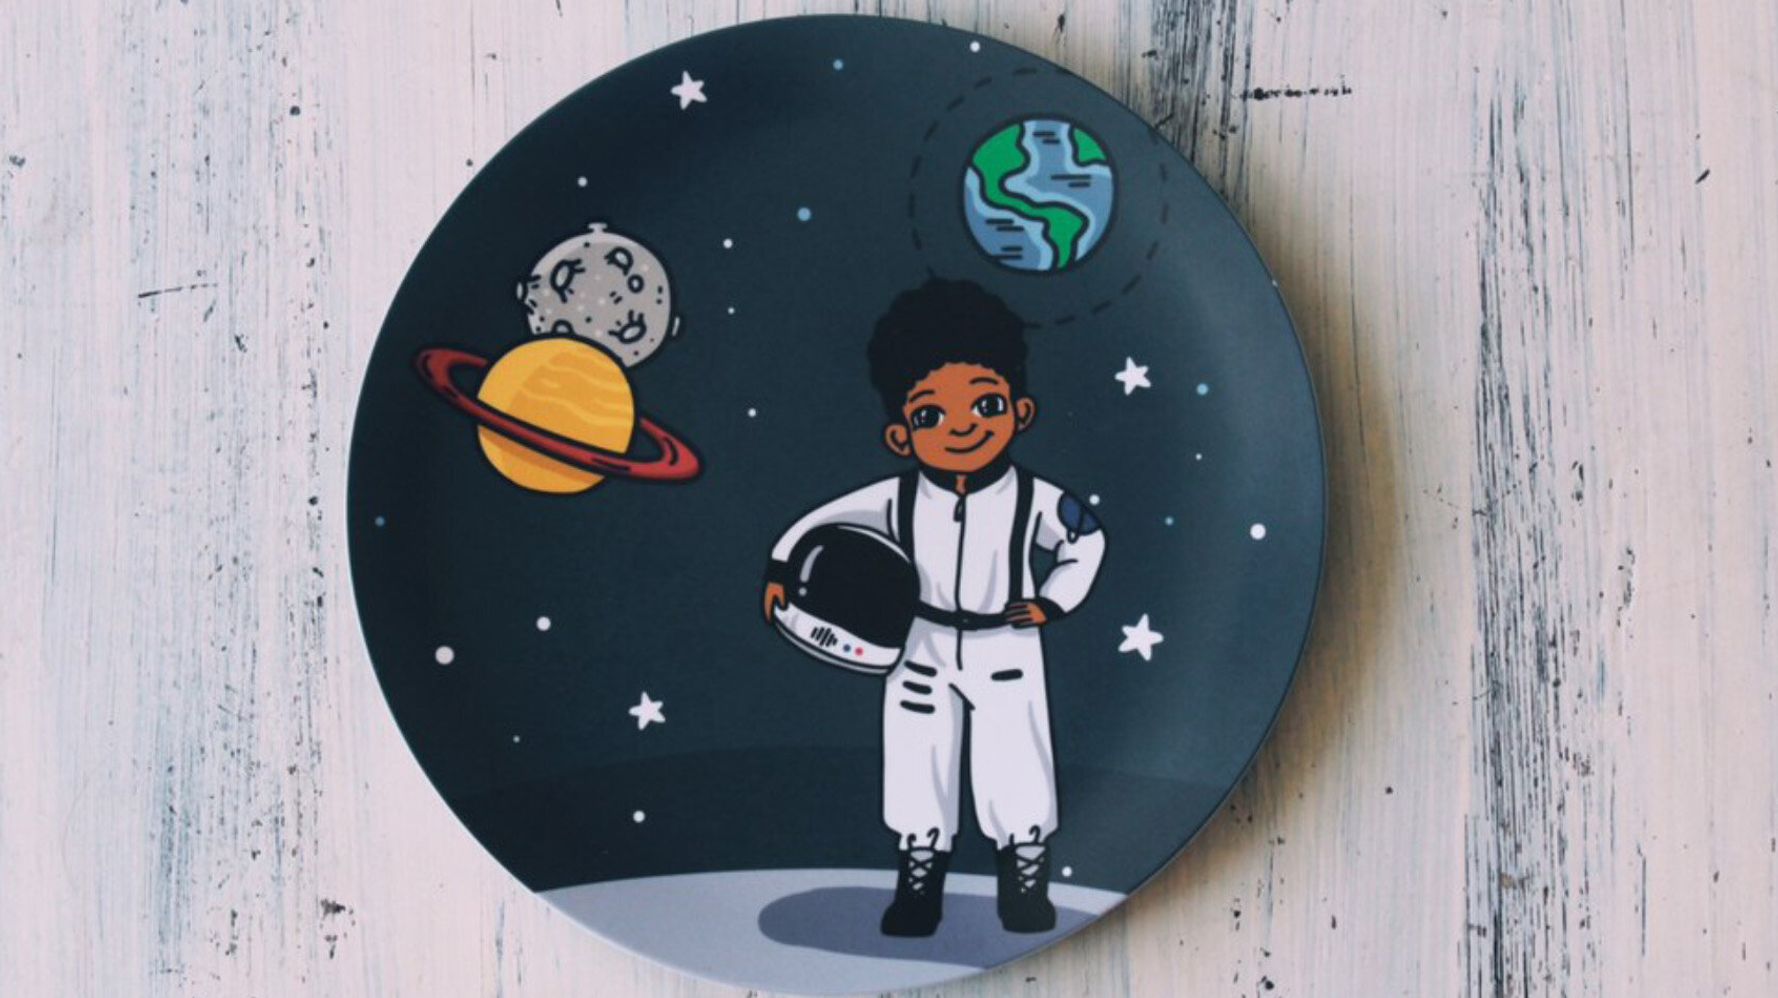 Toys, Books And More From Black-Owned Businesses Kids Will Love